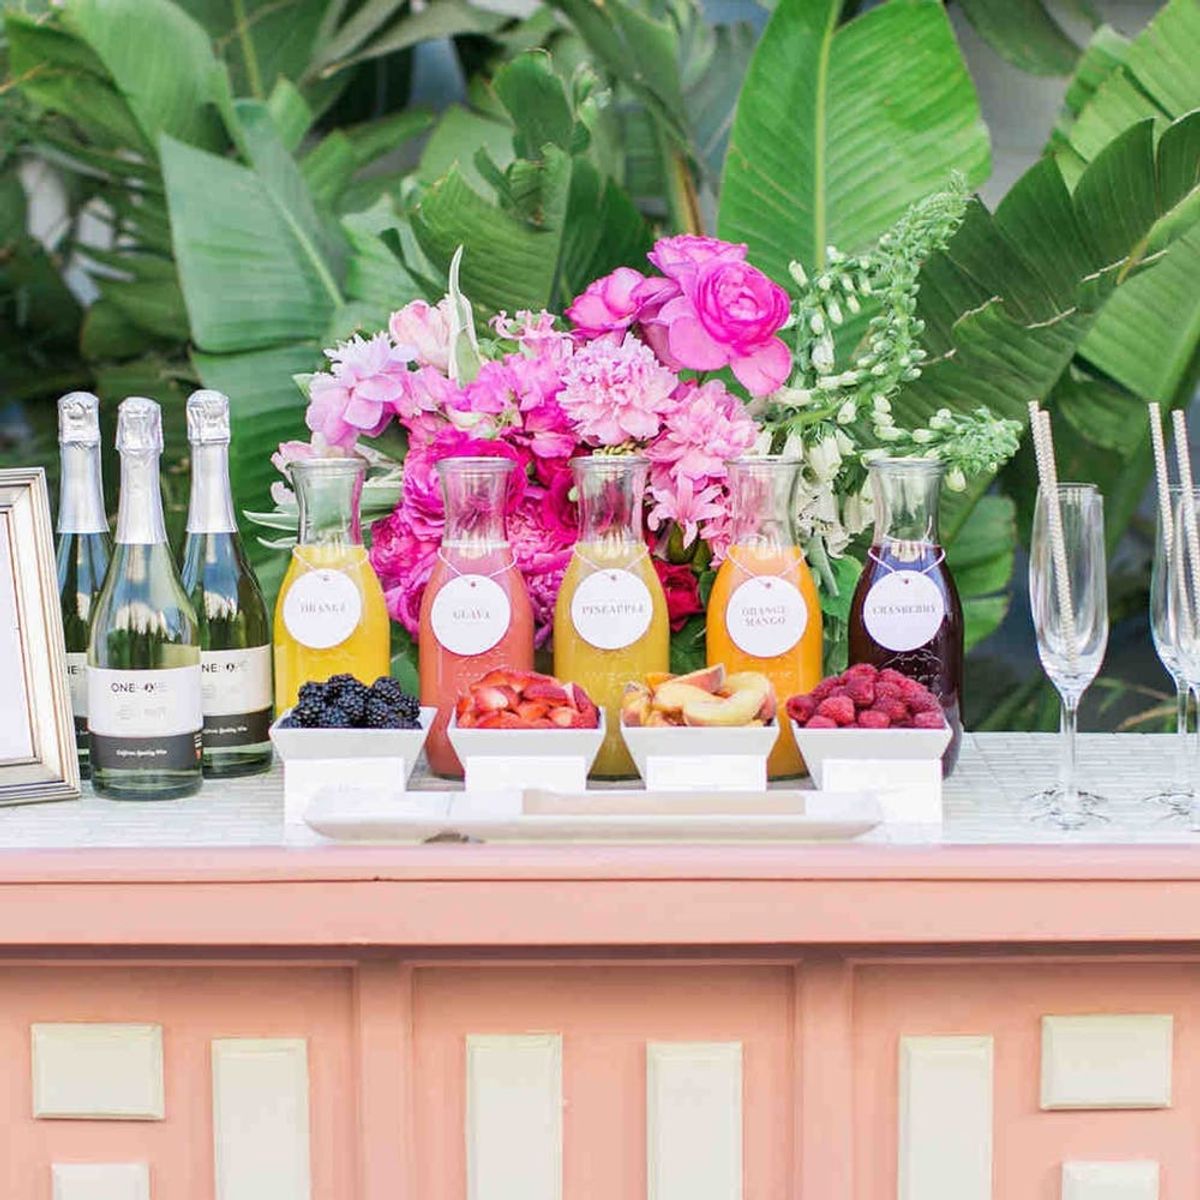 11 Breathtaking Outdoor Bar Ideas for Your Bridal Shower